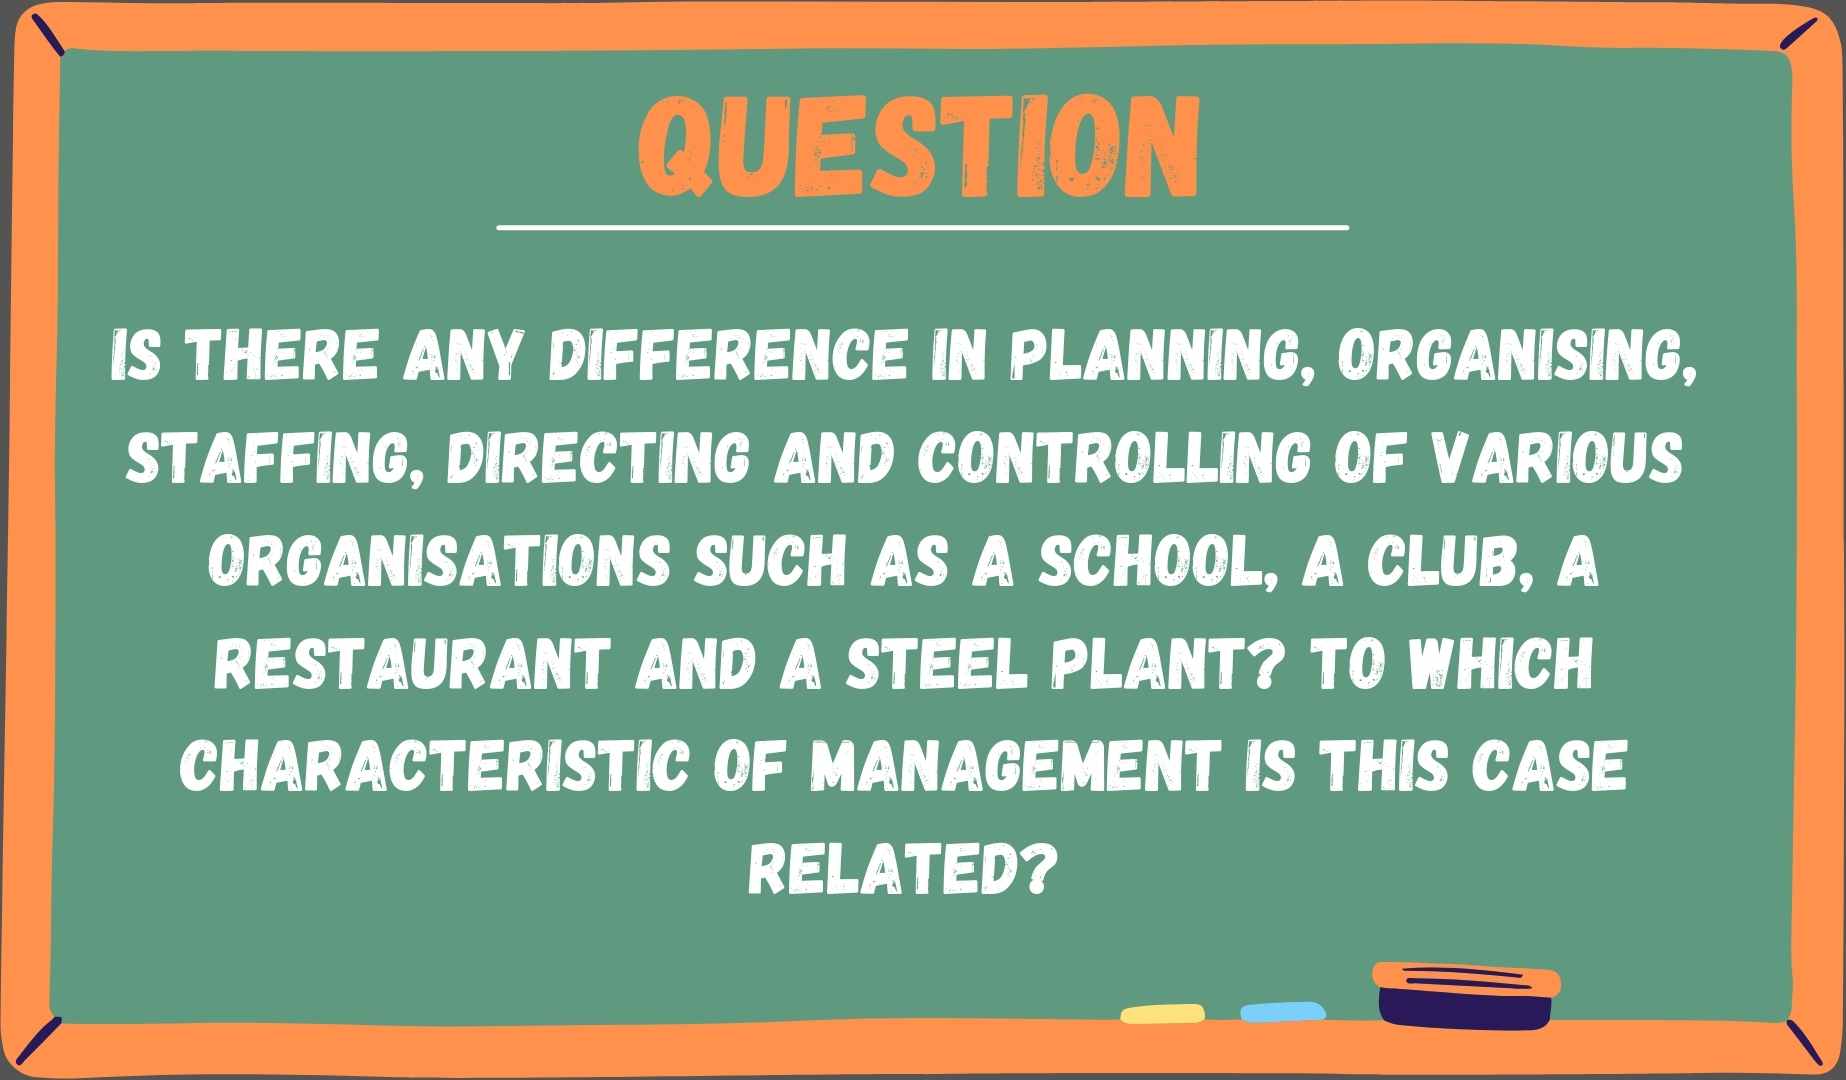 Is there any difference in planning, organising, staffing, directing and controlling of various organisations such as a school, a club, a restaurant and a steel plant? To which characteristic of management is this case related?